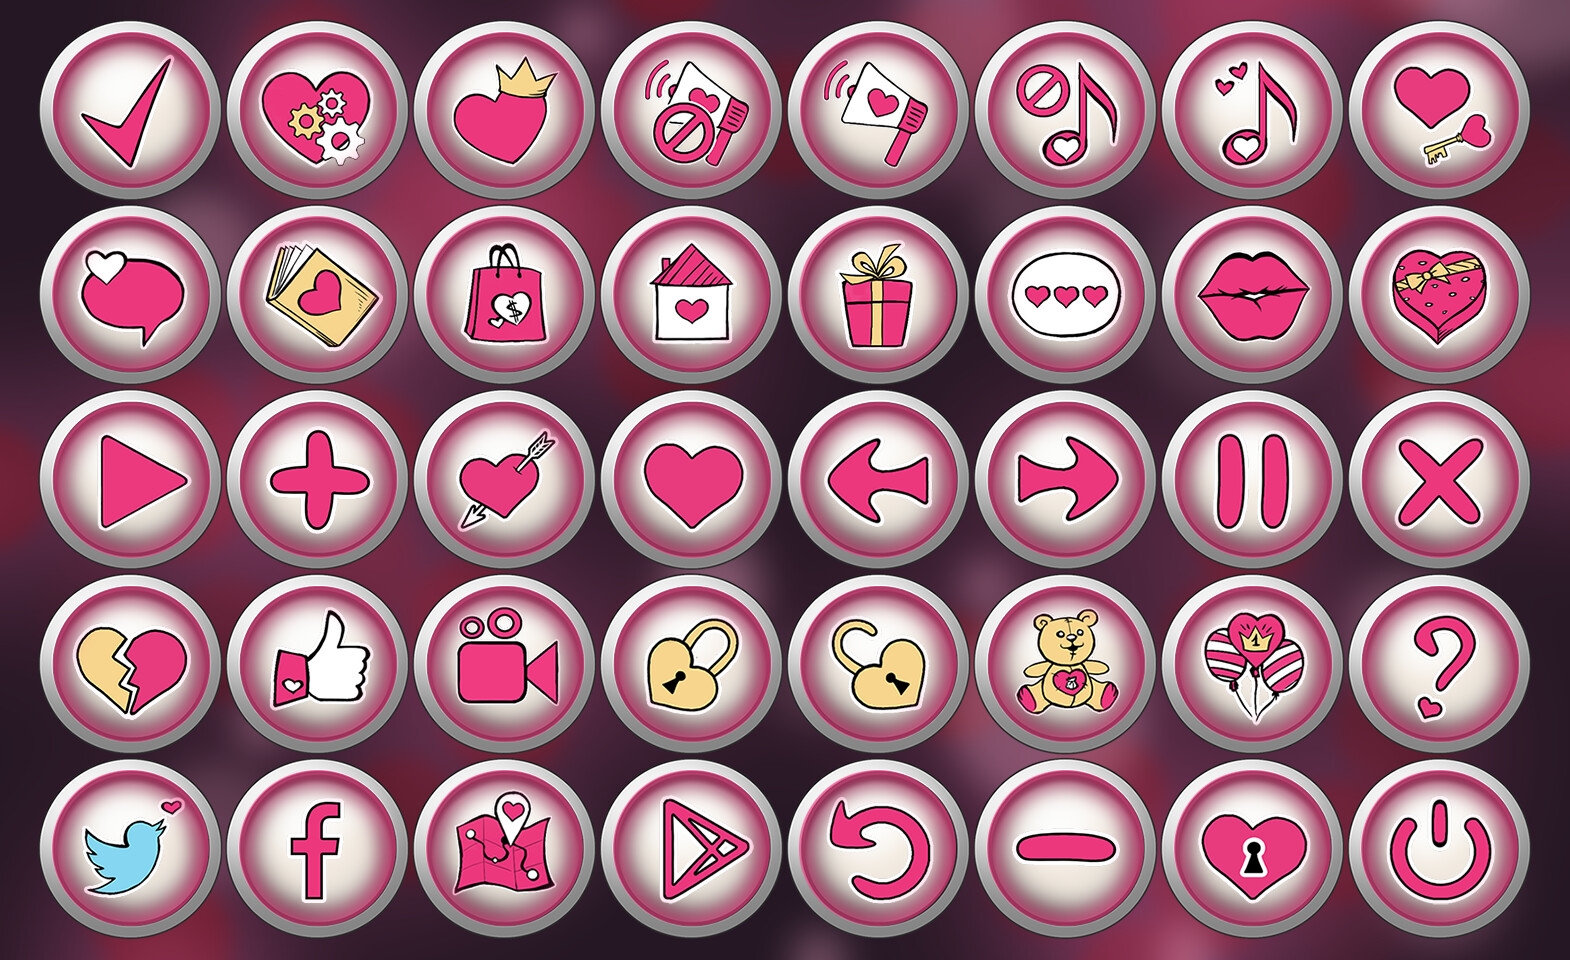 Buttons with icons